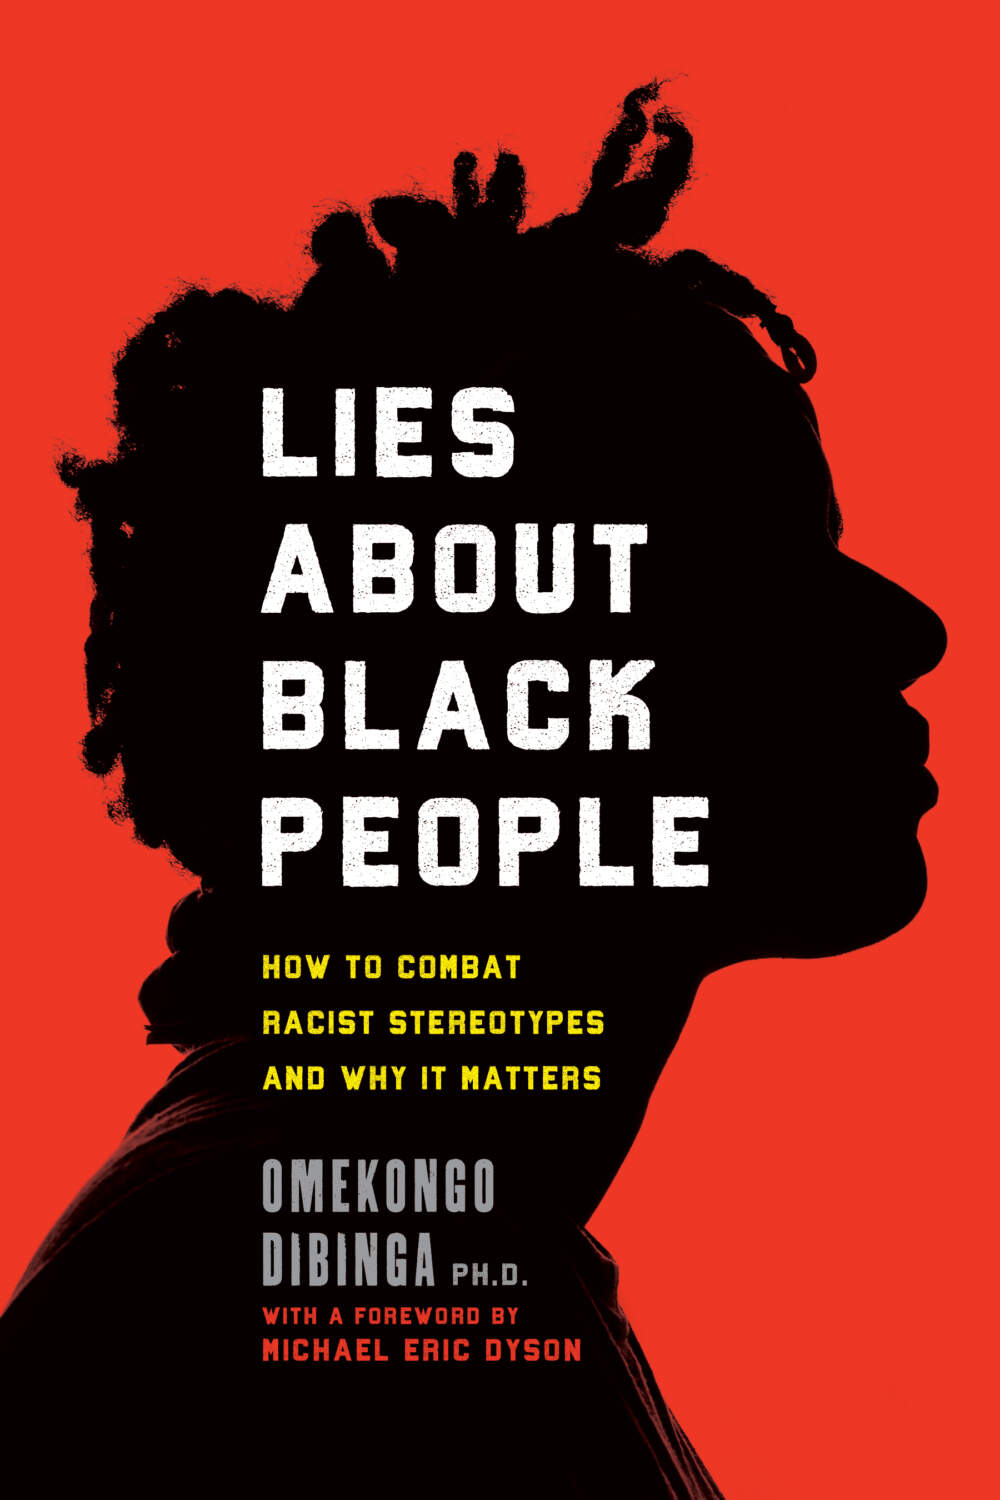 The cover of "Lies about Black People." (Courtesy)